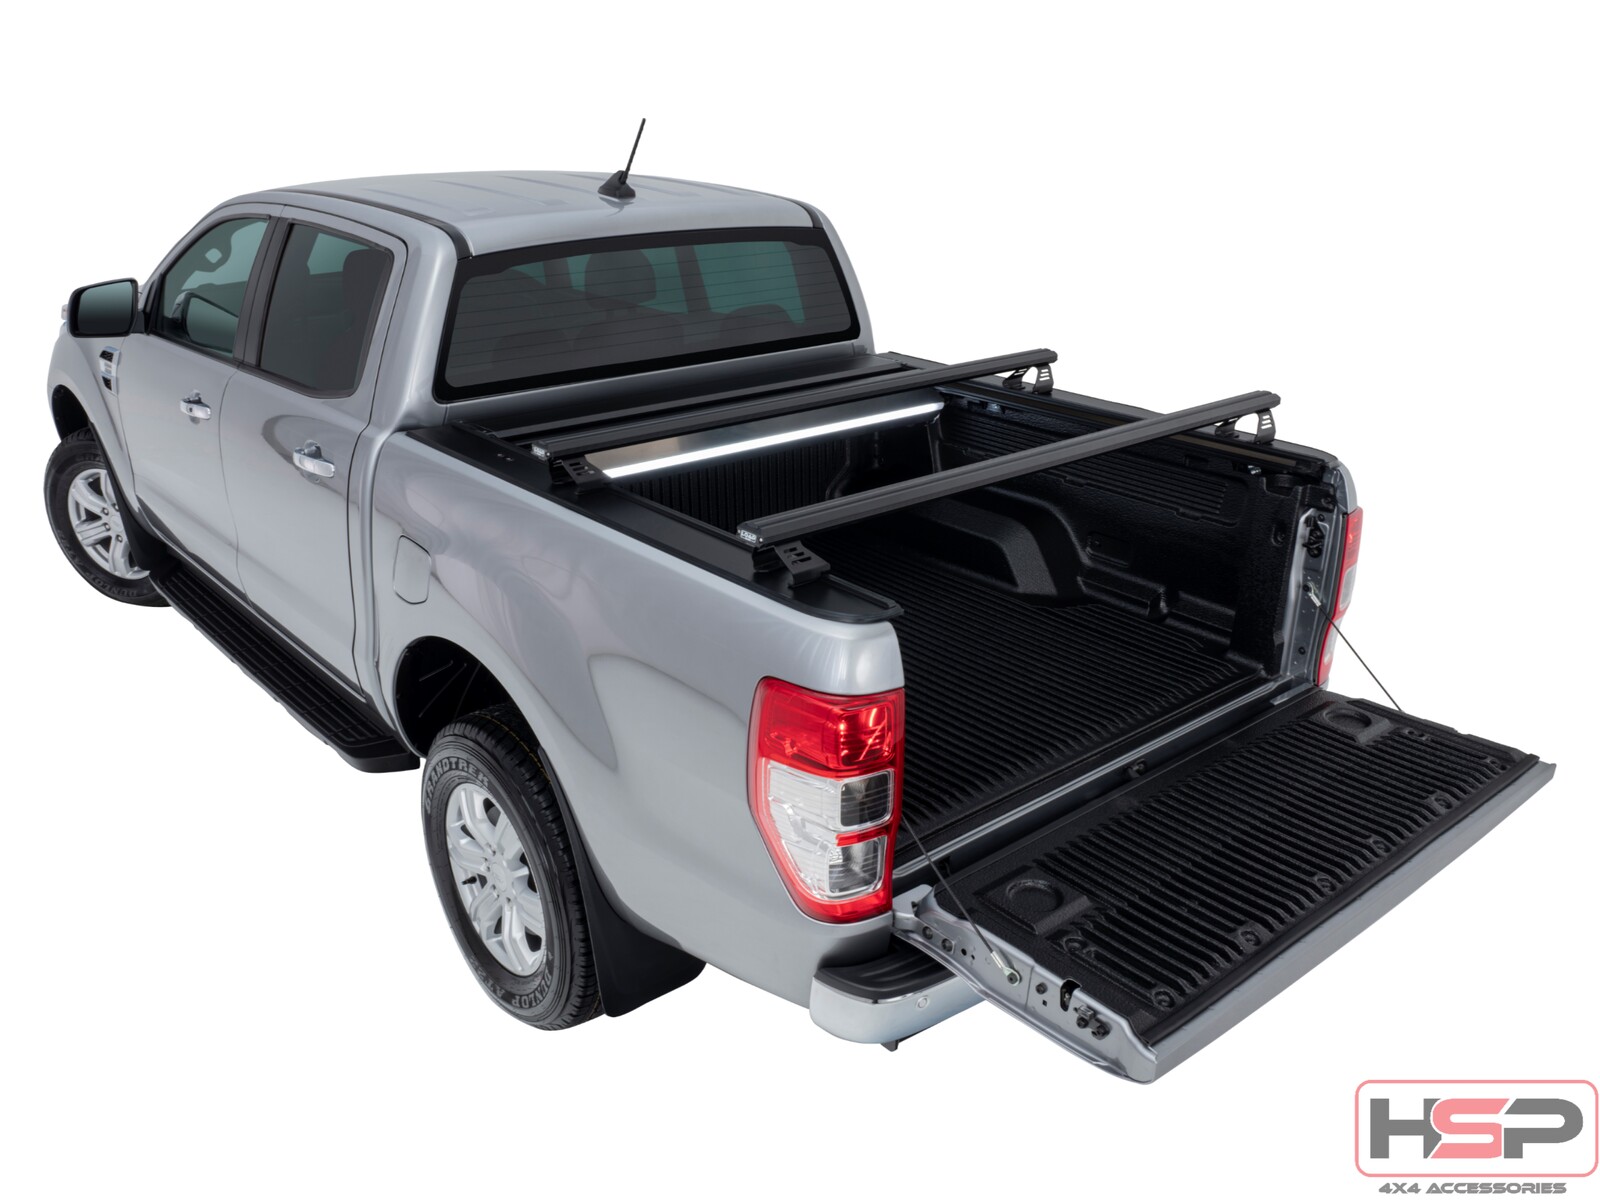 HSP Roll R Cover Series 3 To Suit Ford Ranger PX & Raptor (Dual Cab)